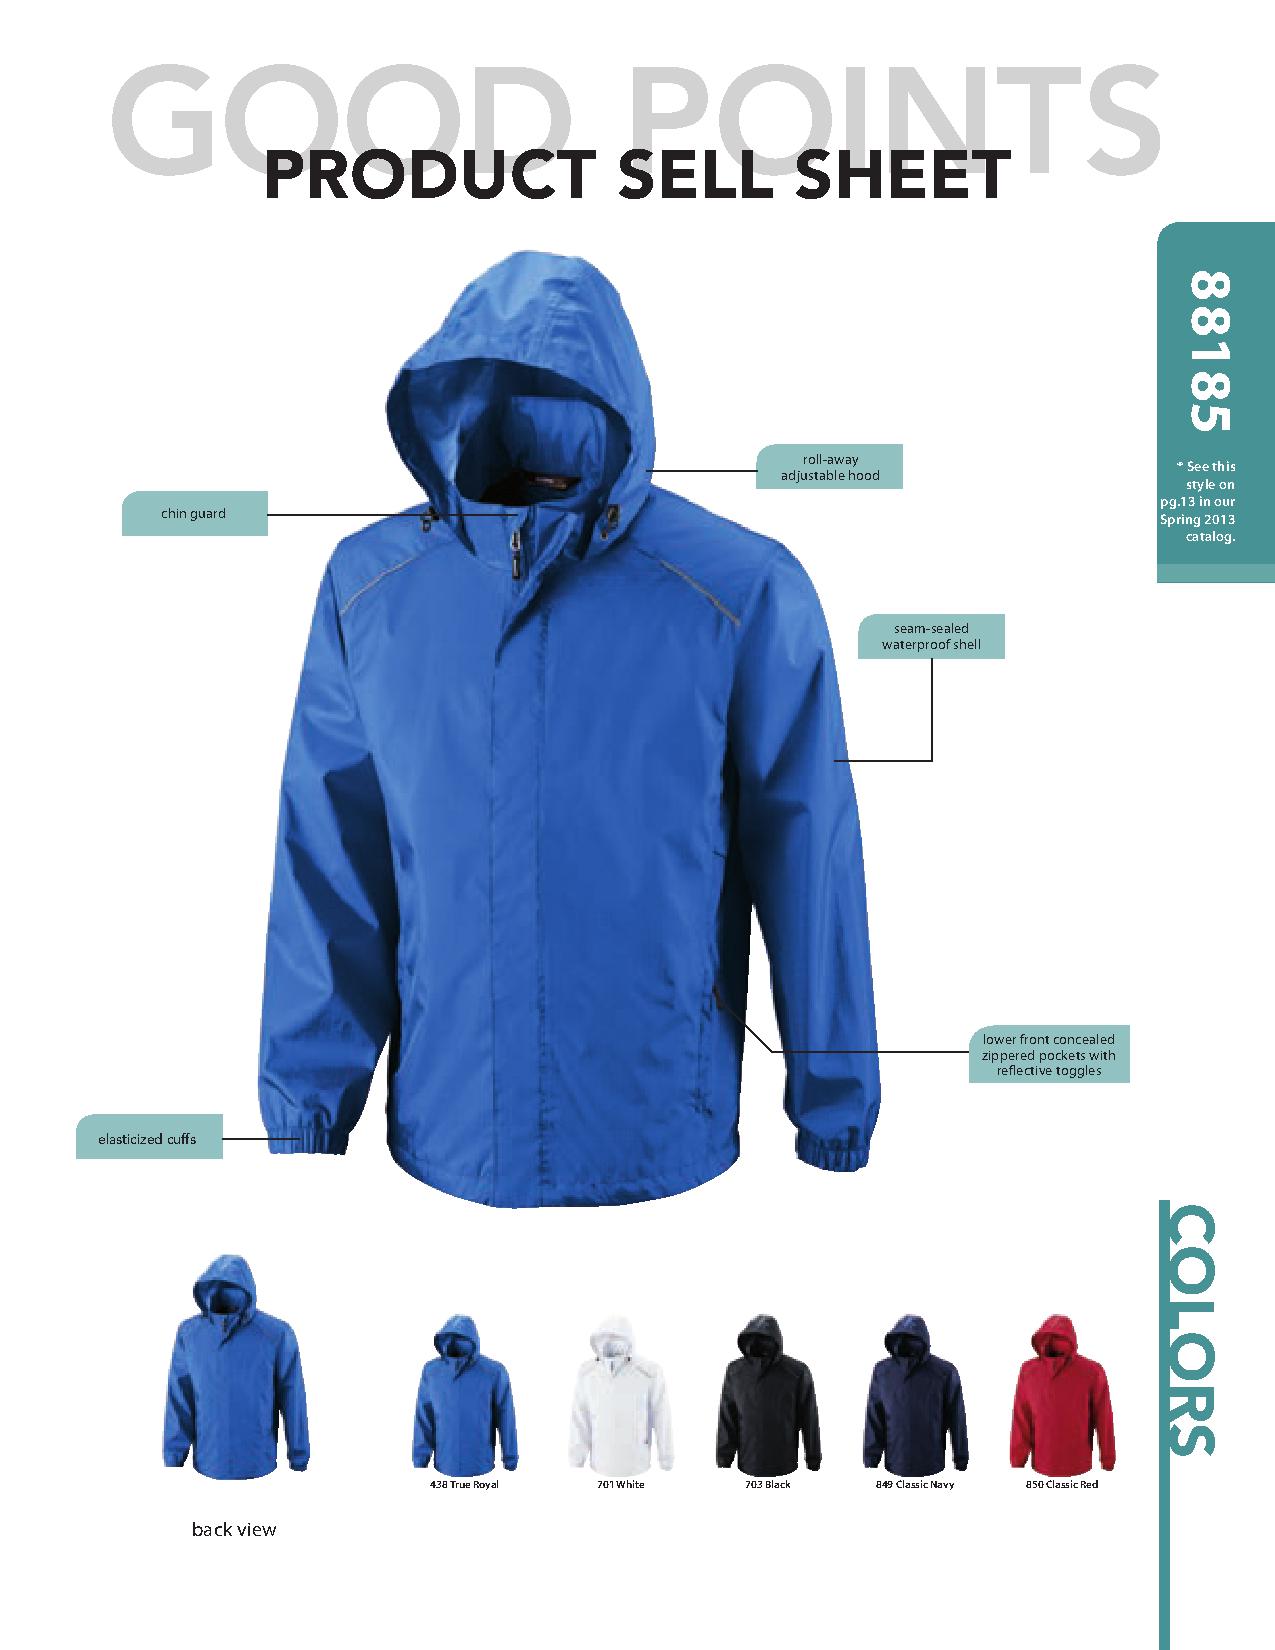 Core 365 88185 - Men's Climate Seam-Sealed Lightweight Variegated Ripstop Jacket